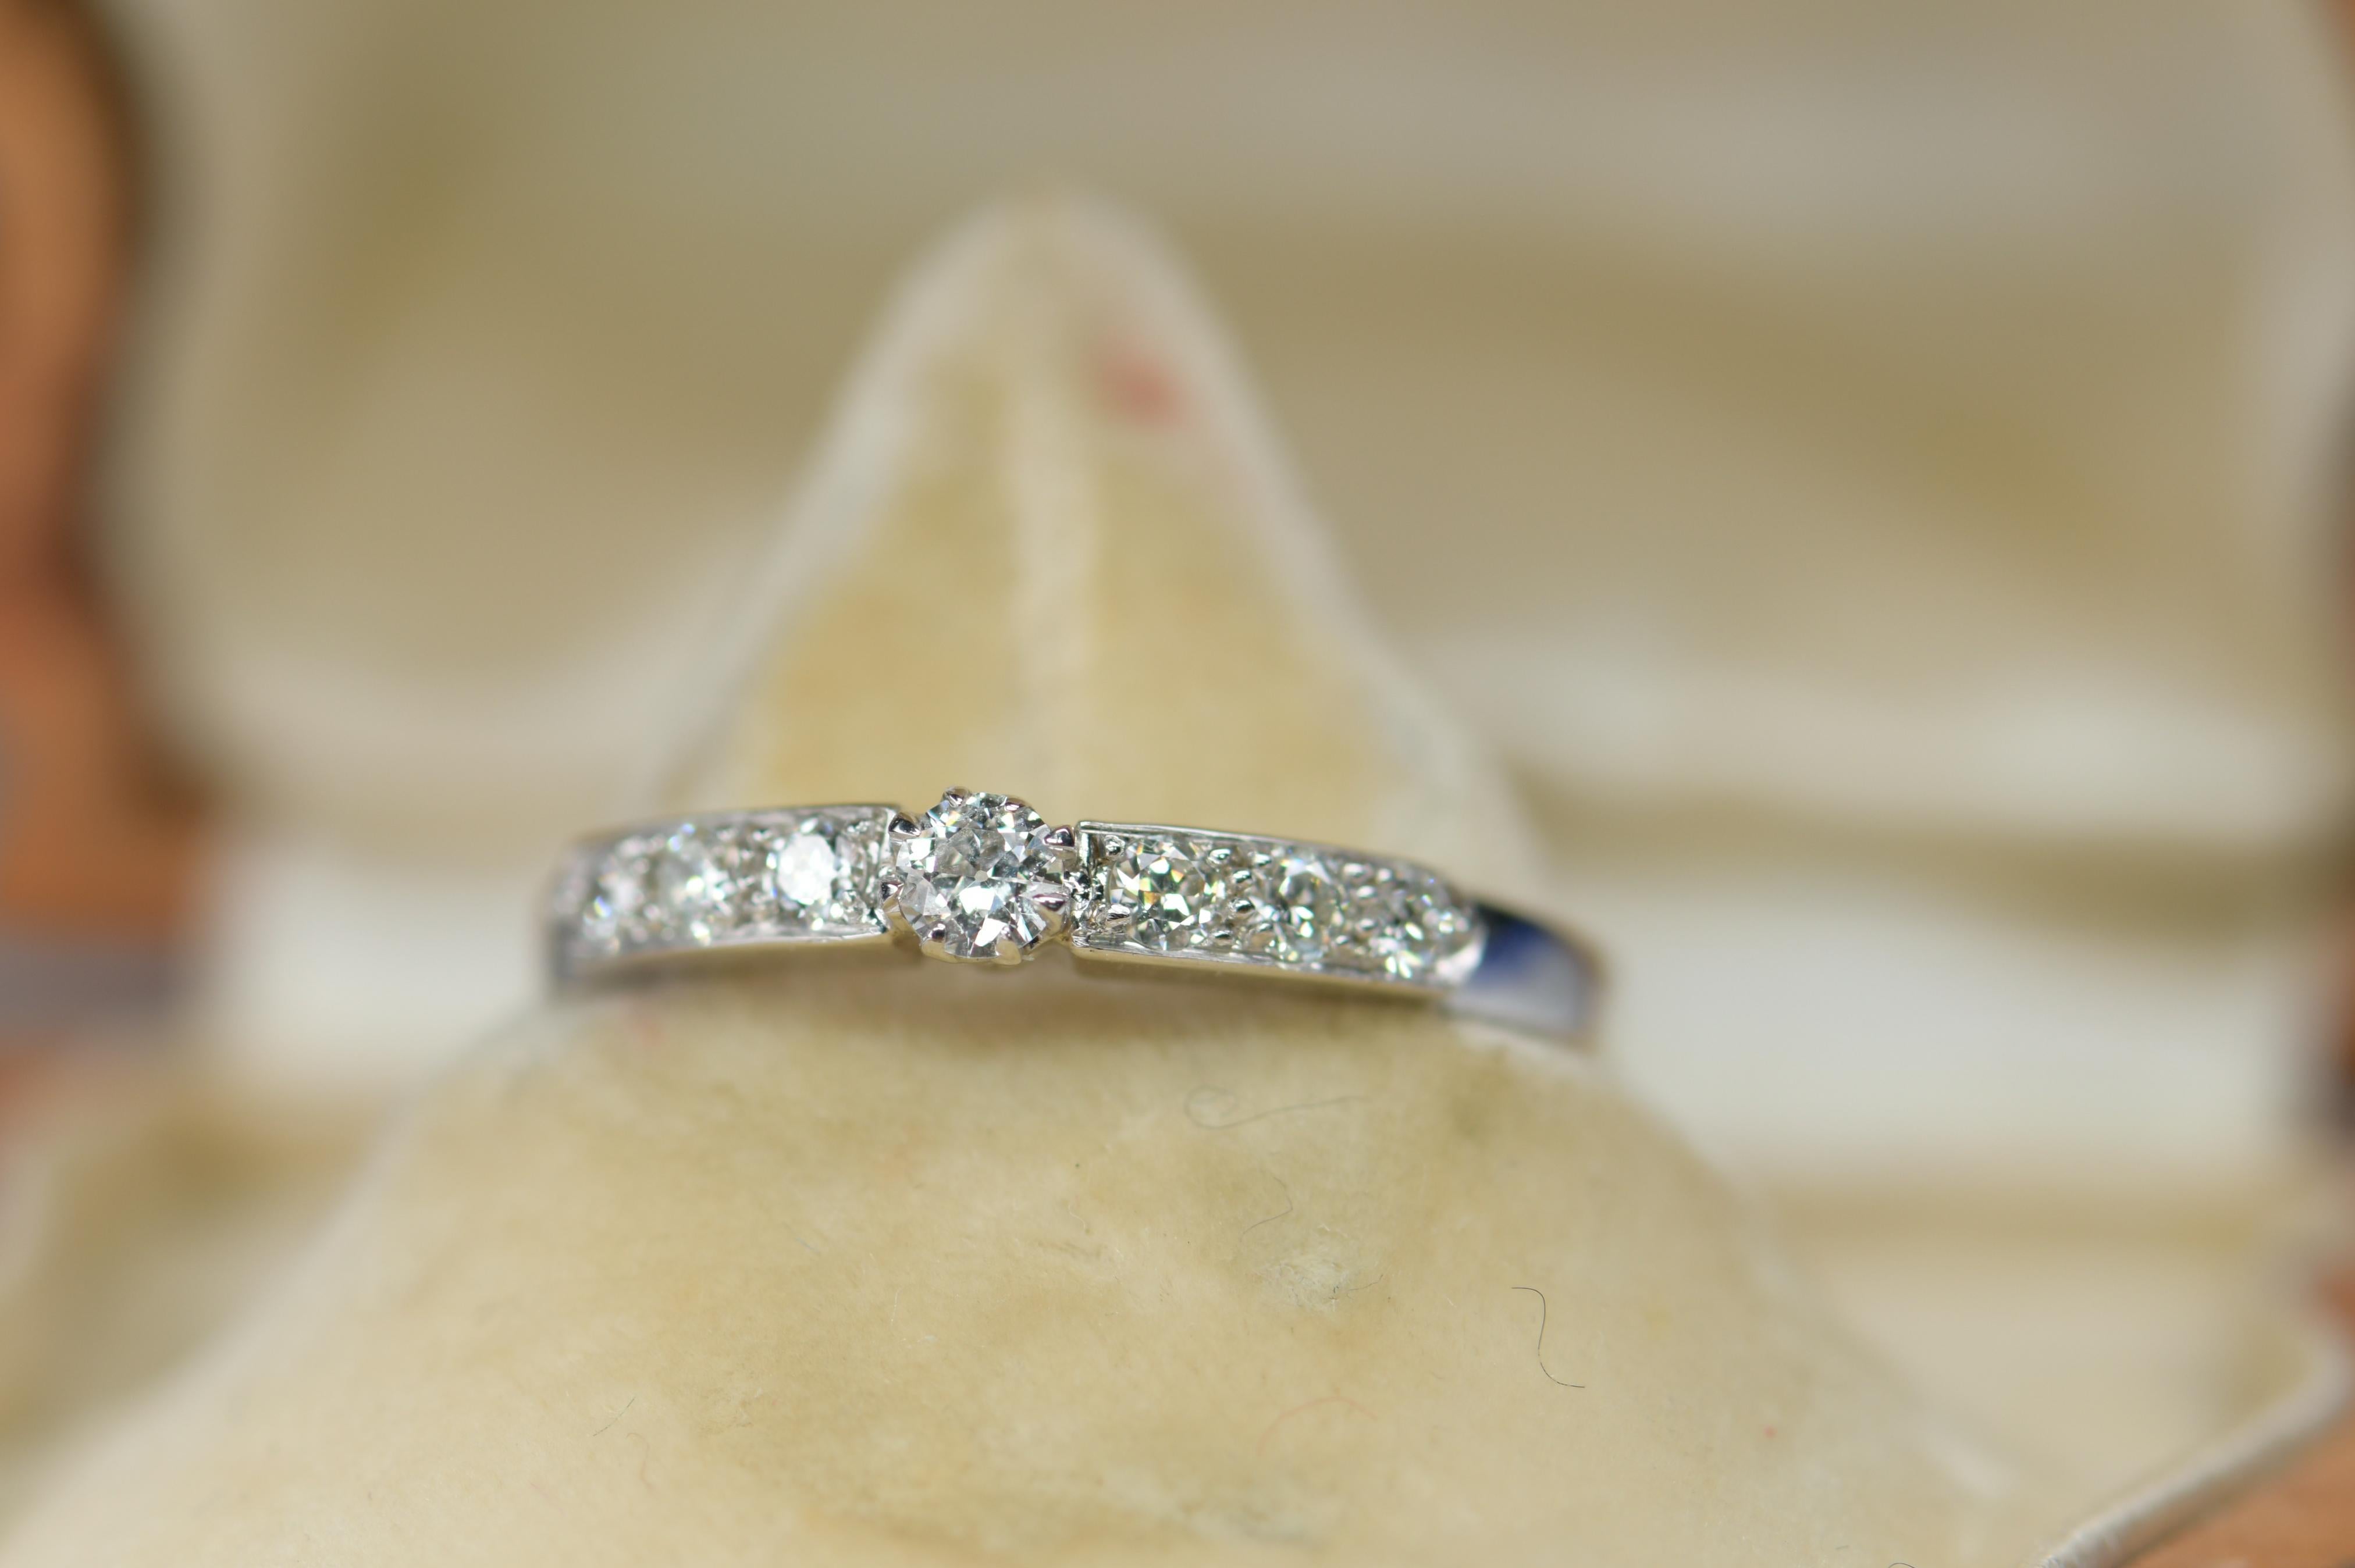 This 18k white gold eternity ring is framed by 0.3 carat of micro-set diamonds around half of the band. Classic and sophisticated, the radiant light reflection from the stones is offset by a smooth polished base.

It is currently a size M (UK), 6.25